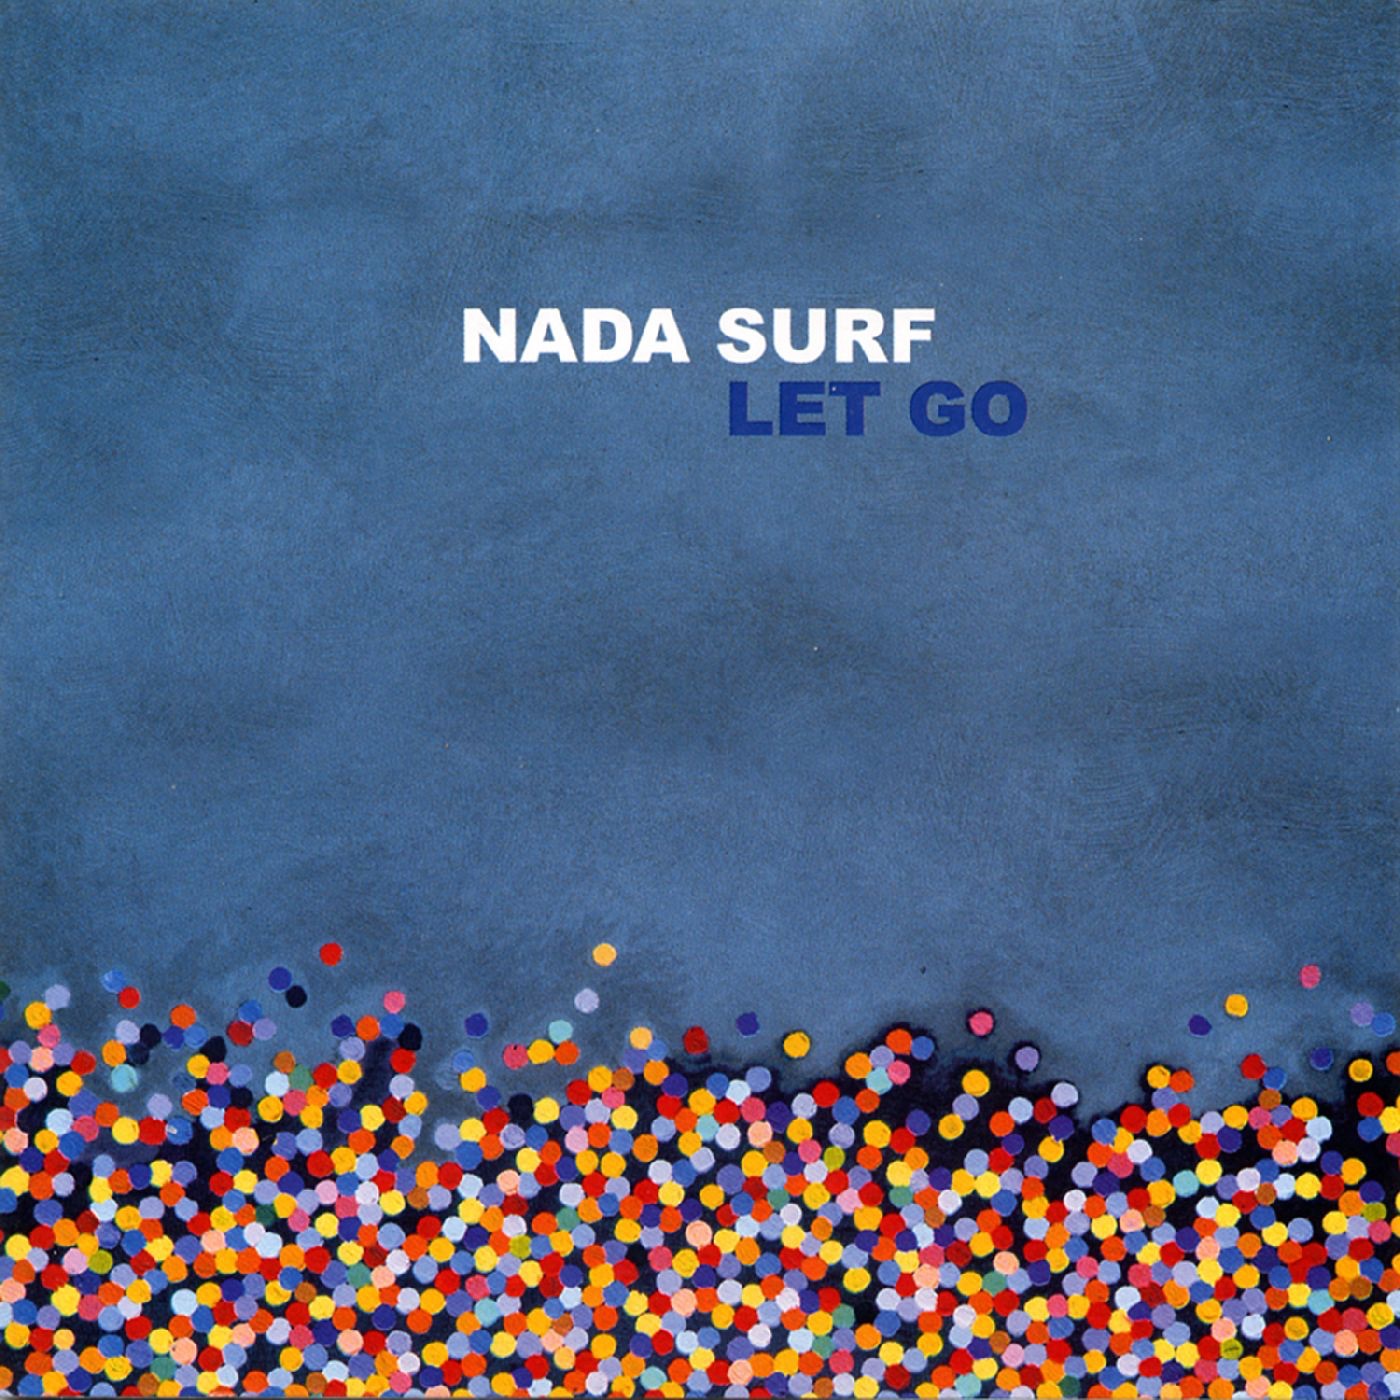 Let Go by Nada Surf